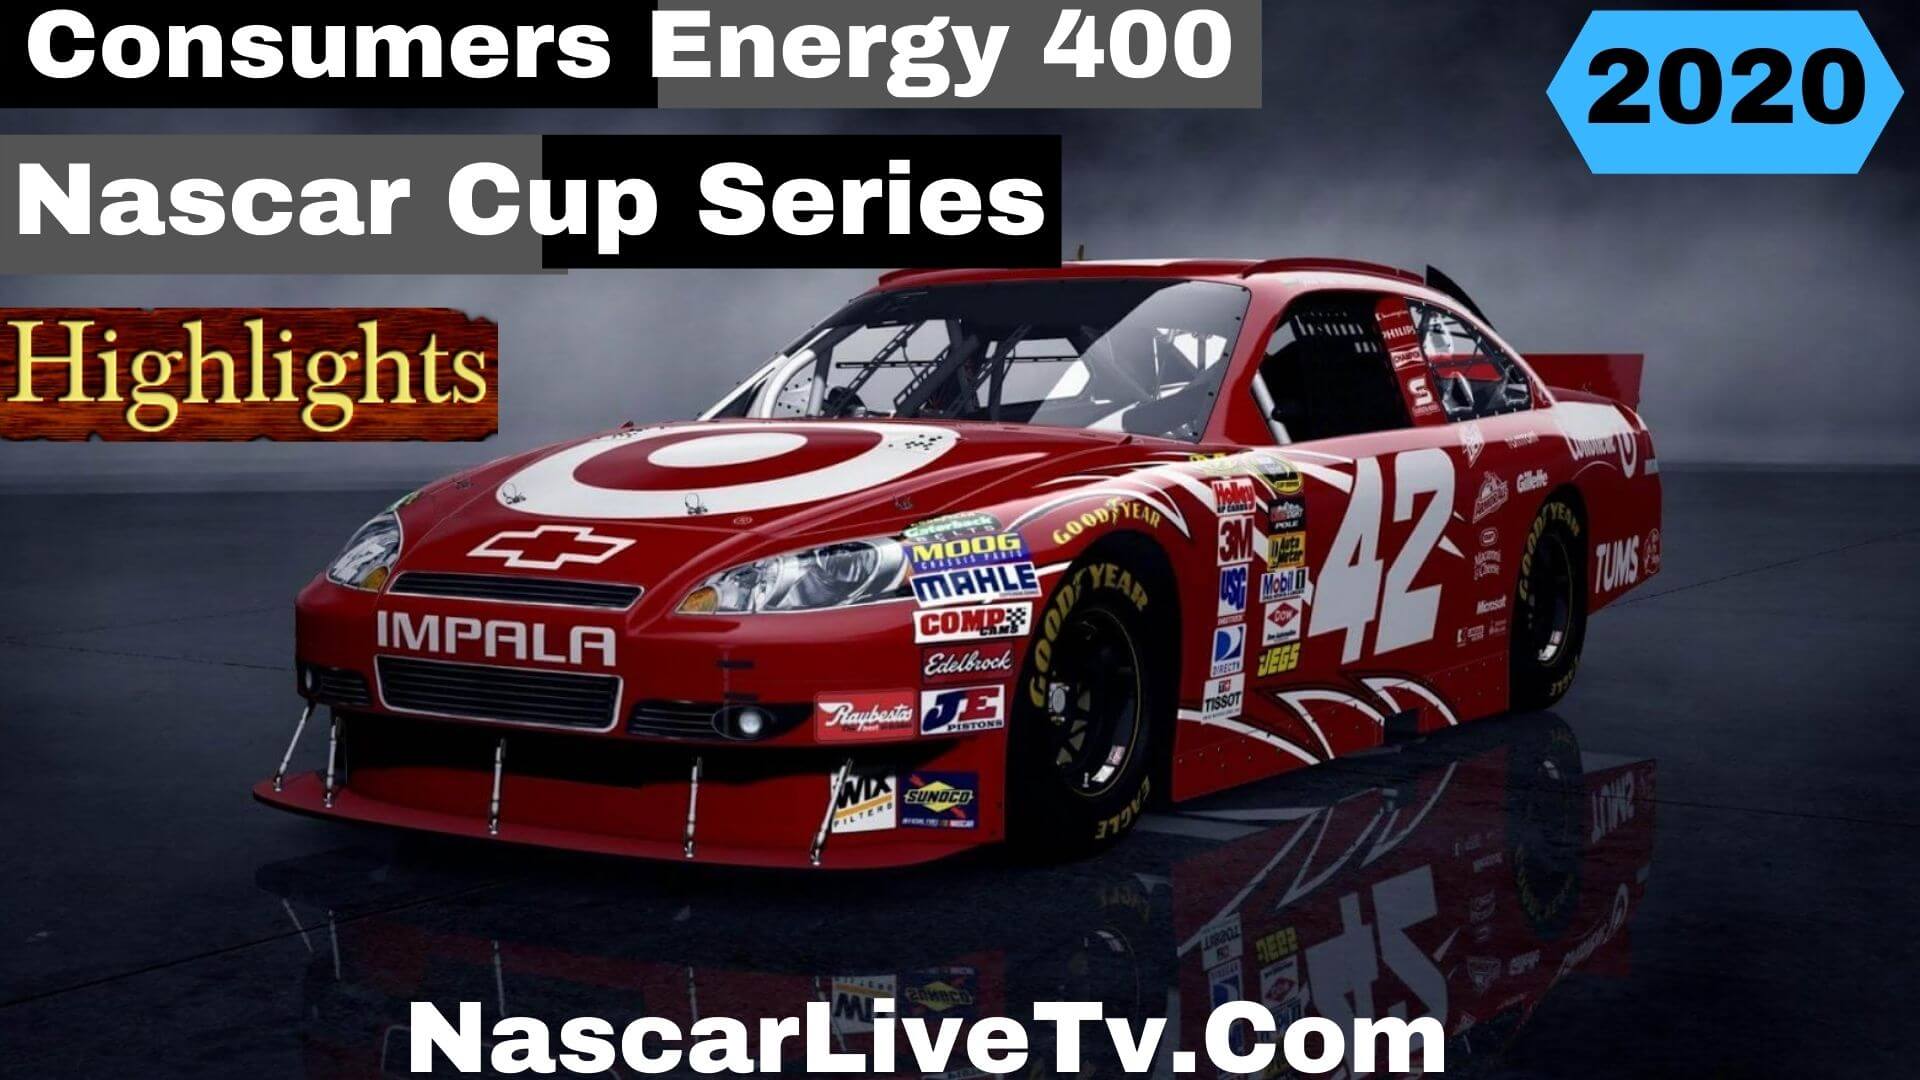 Consumers Energy 400 Nascar Cup Series 2020 Highlights